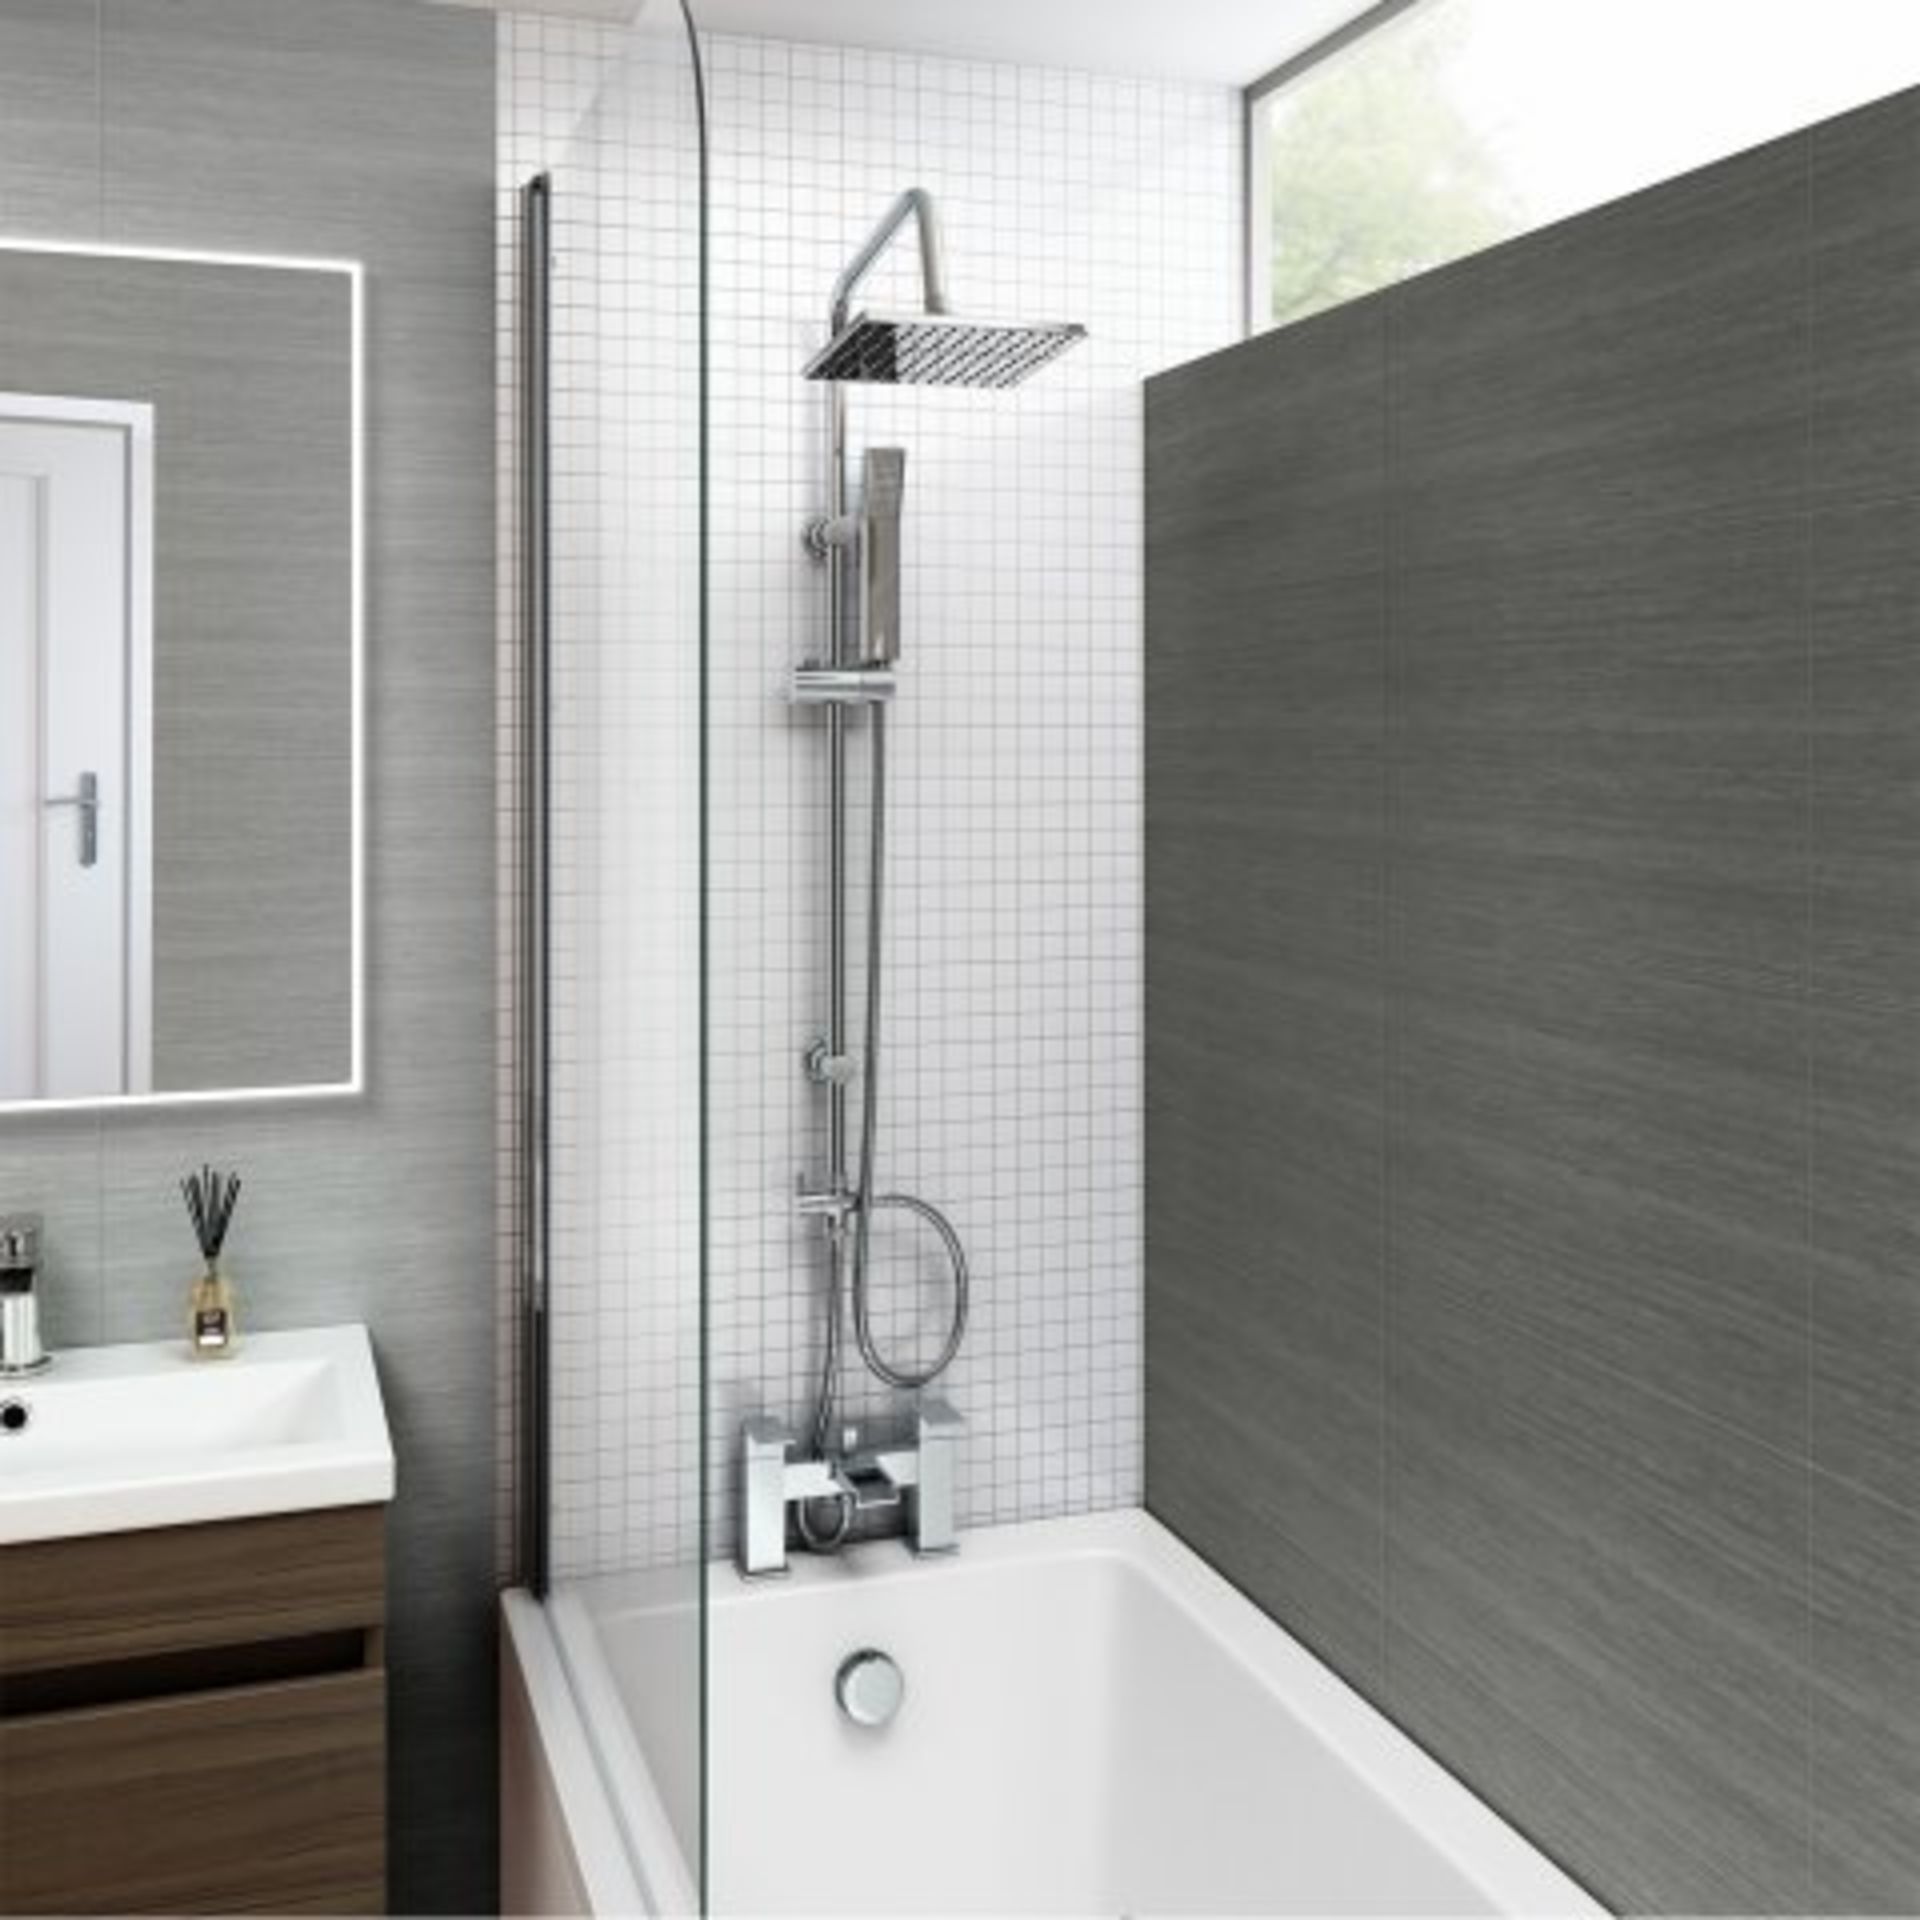 (T87) Square Exposed Thermostatic Shower Kit & Medium Shower Head. The straight lines and - Image 2 of 6